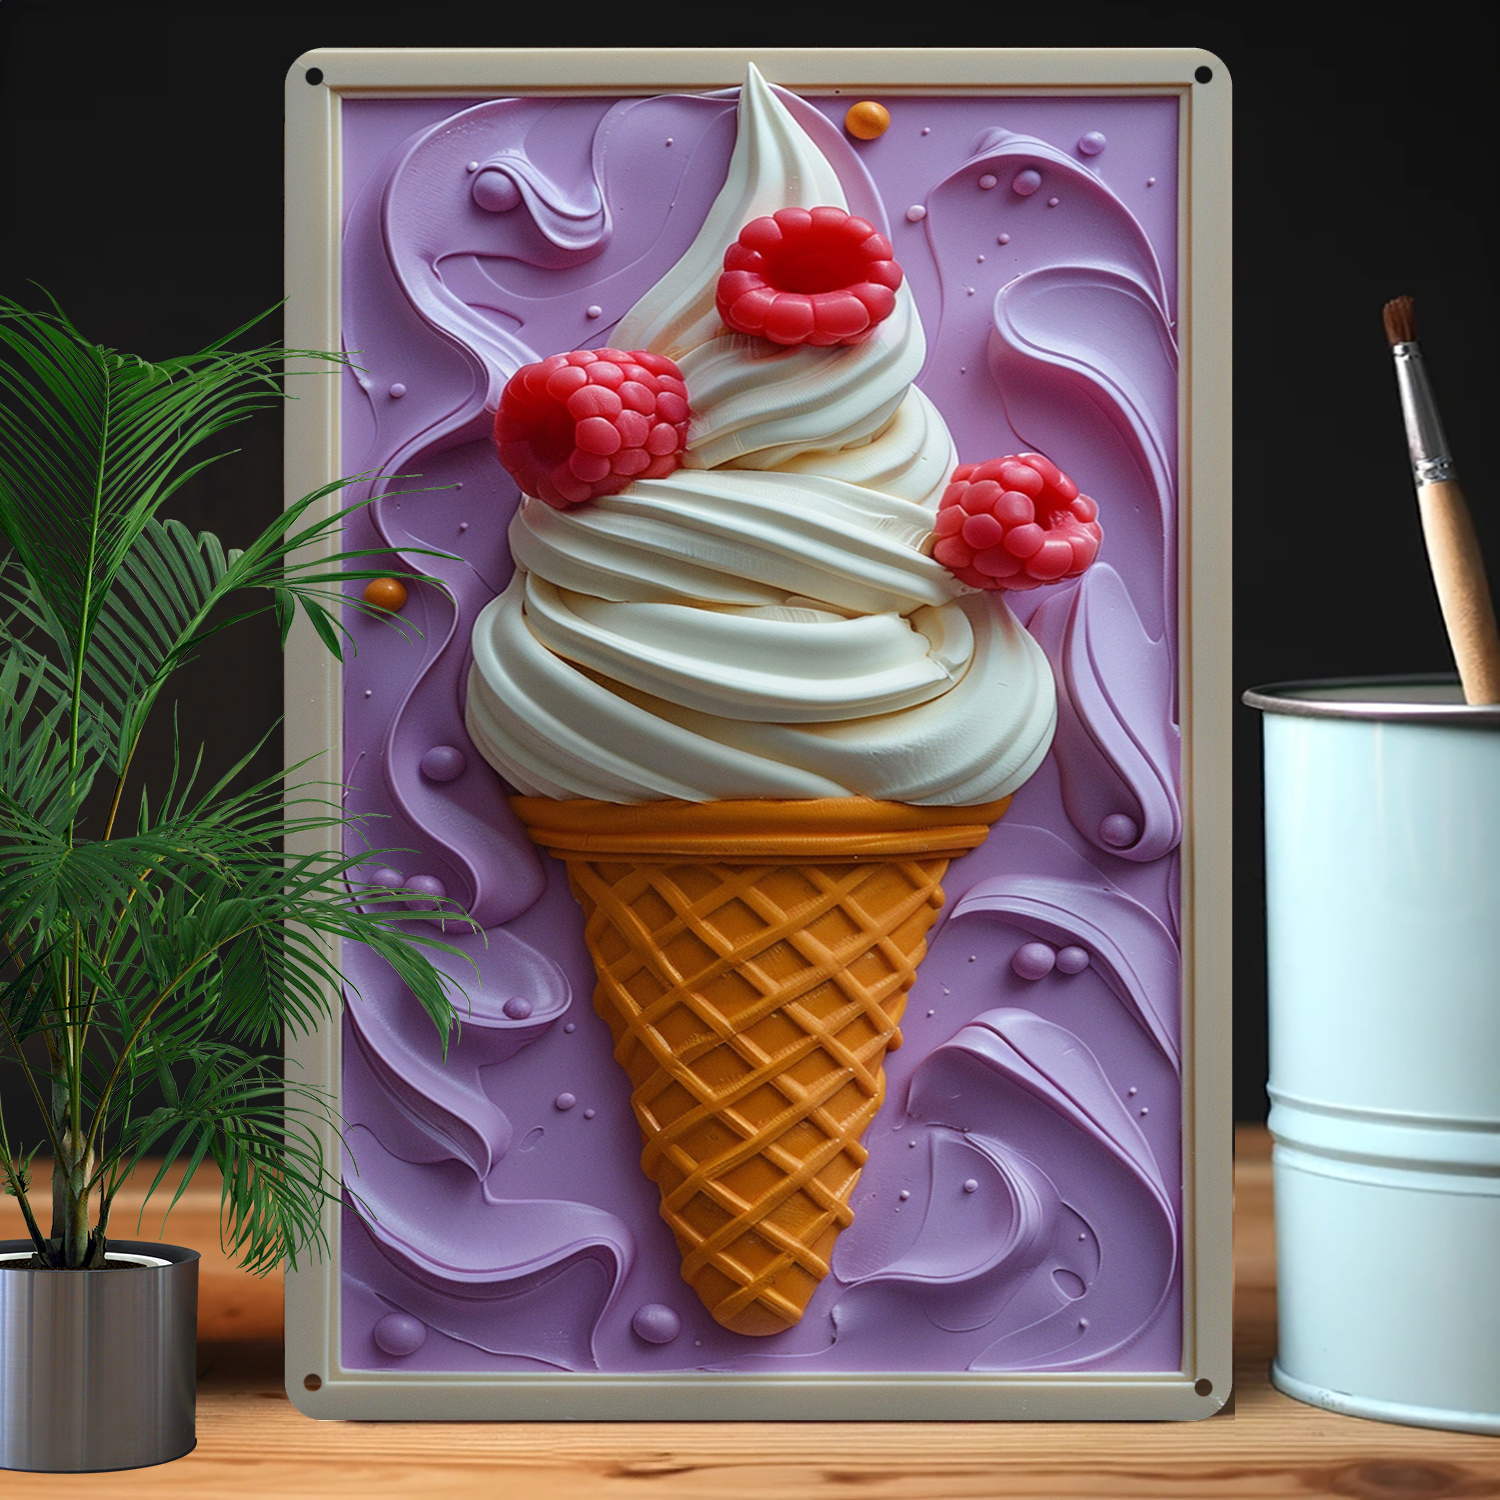 

Ice Cream Cone Aluminum Sign - 8x12 Inch Moisture-resistant Metal Wall Art With 3d Visual Effects, High Bend Resistance For Home, Garden, Store, Seasonal Decor, Gift A2386